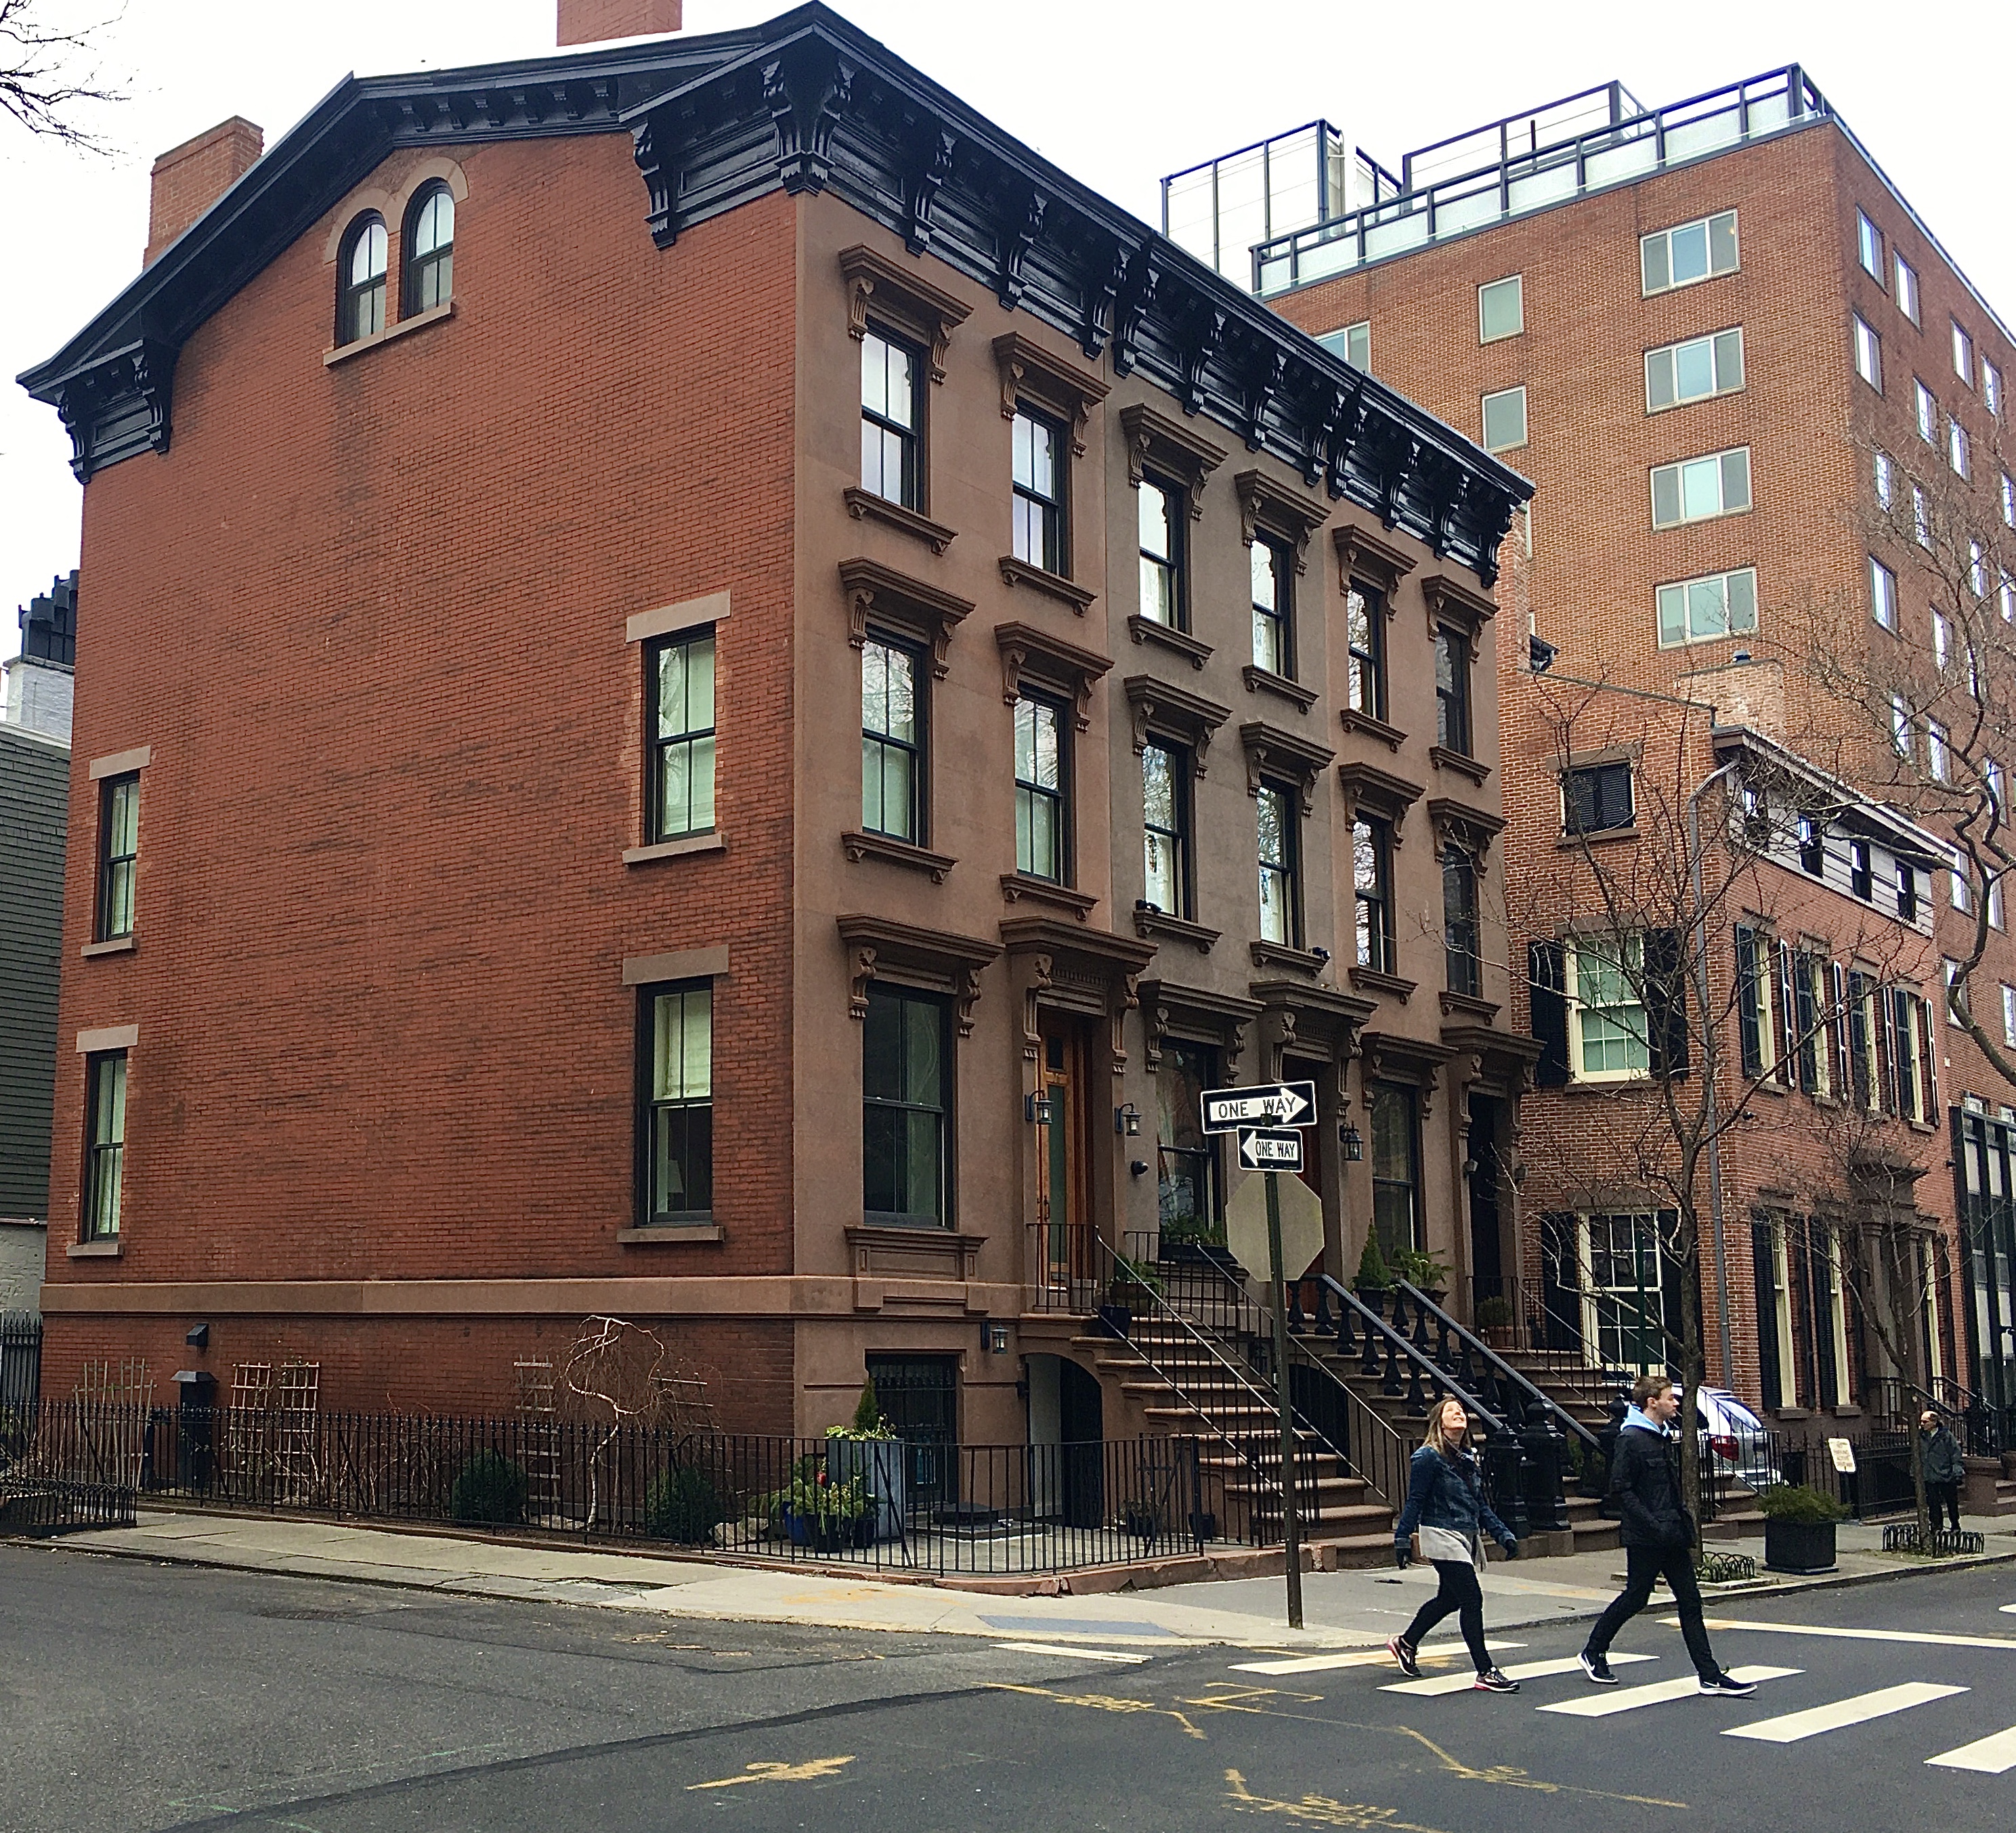 Truman Capote lived in the brick house with shutters, which is 70 Willow St. Photo: Lore Croghan/Brooklyn Eagle